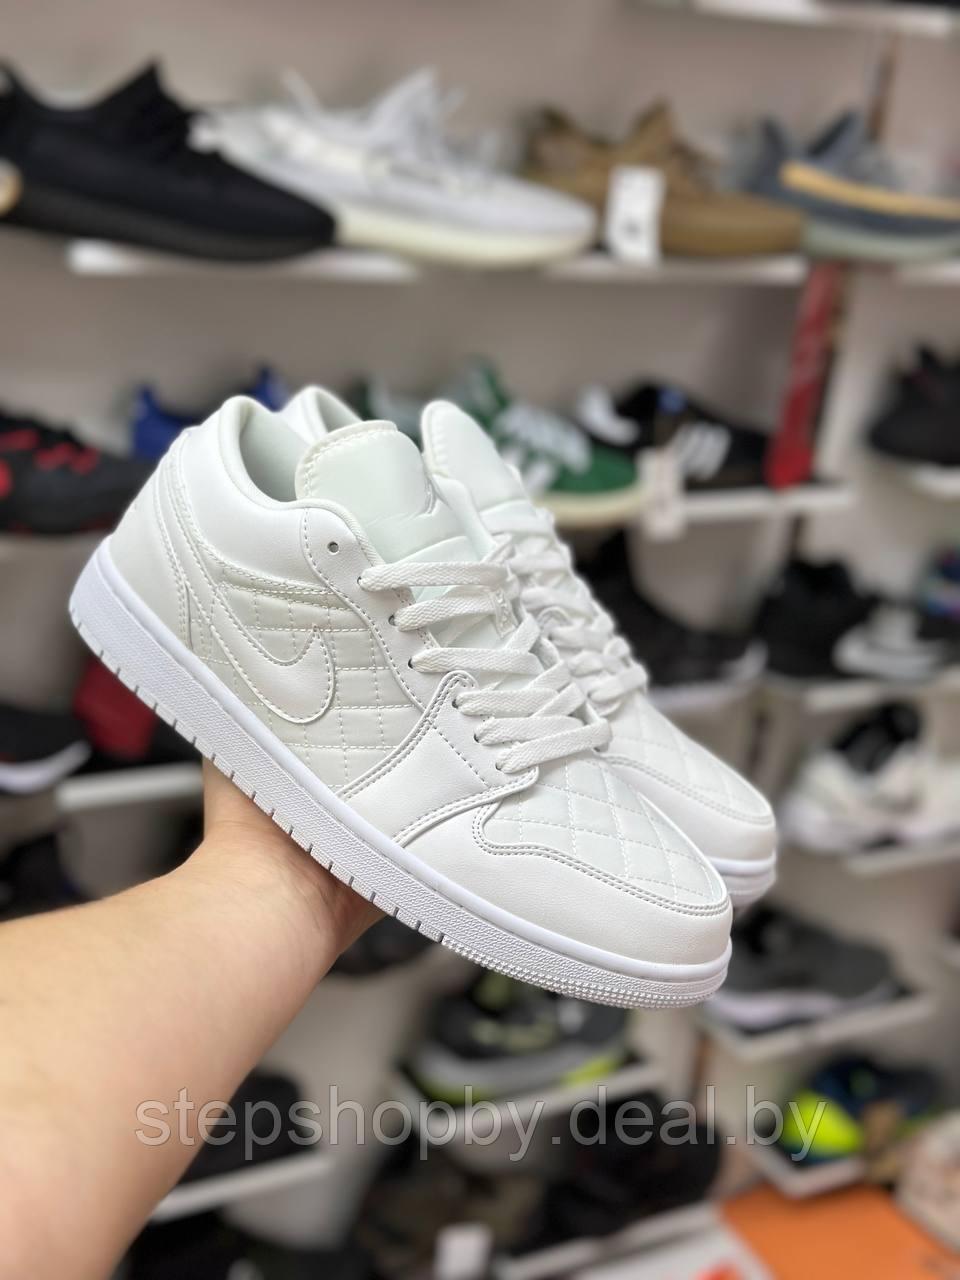 Кроссовки Nike Air Jordan 1 Low Quilted White - фото 2 - id-p212910441